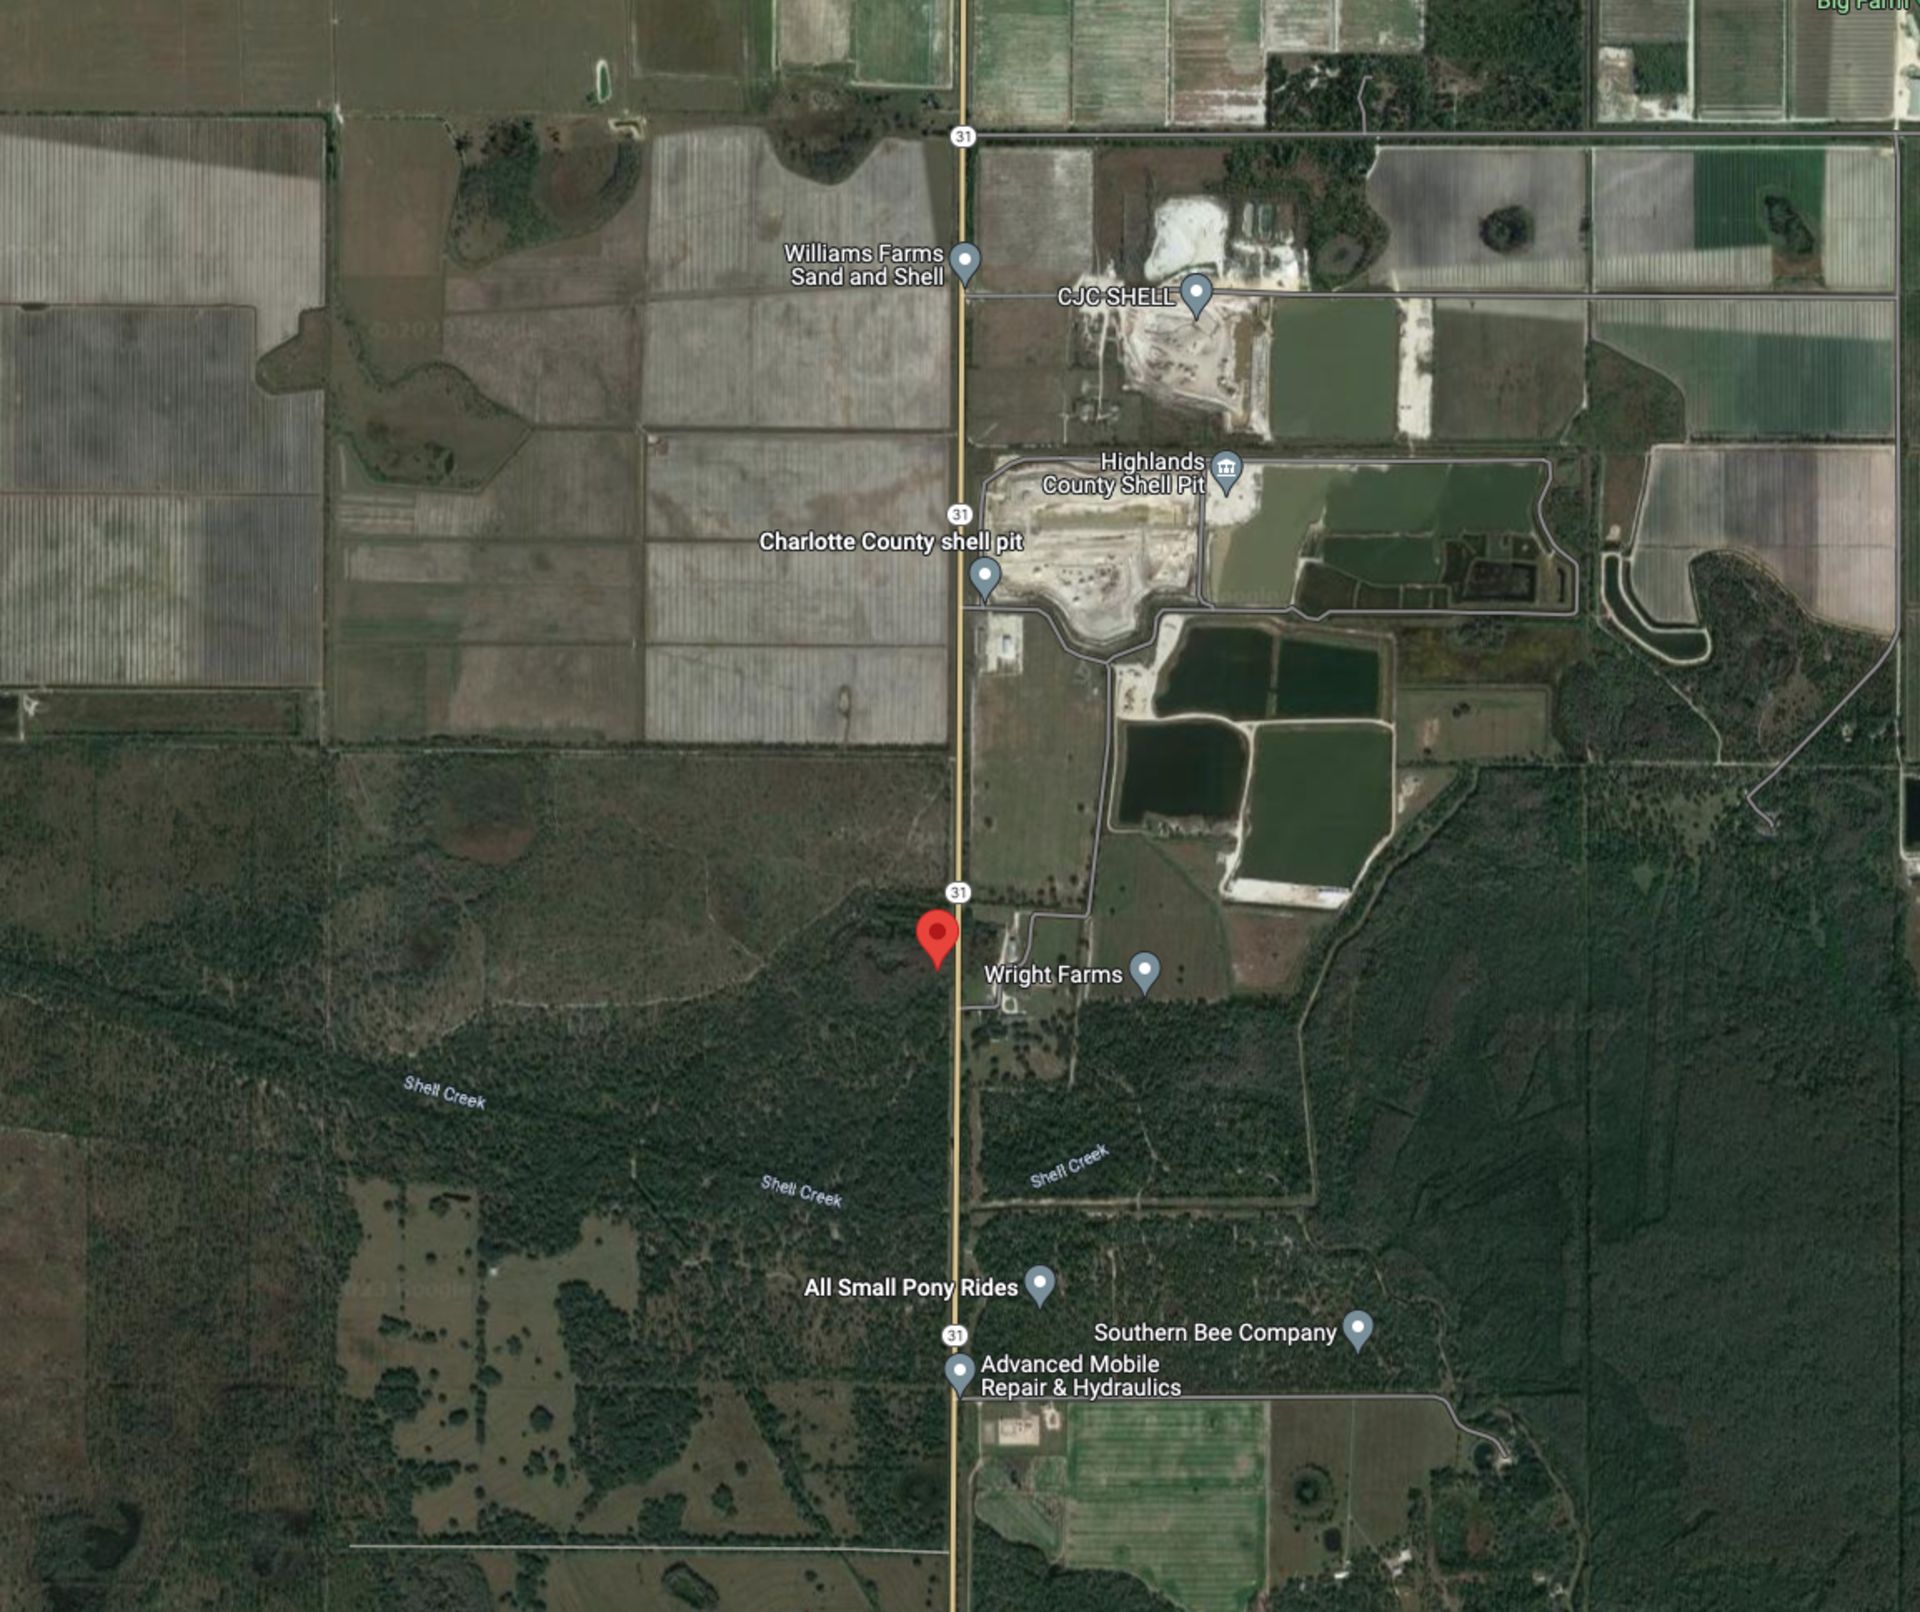 Claim Your Piece of Land in Charlotte County, Florida! - Image 10 of 12